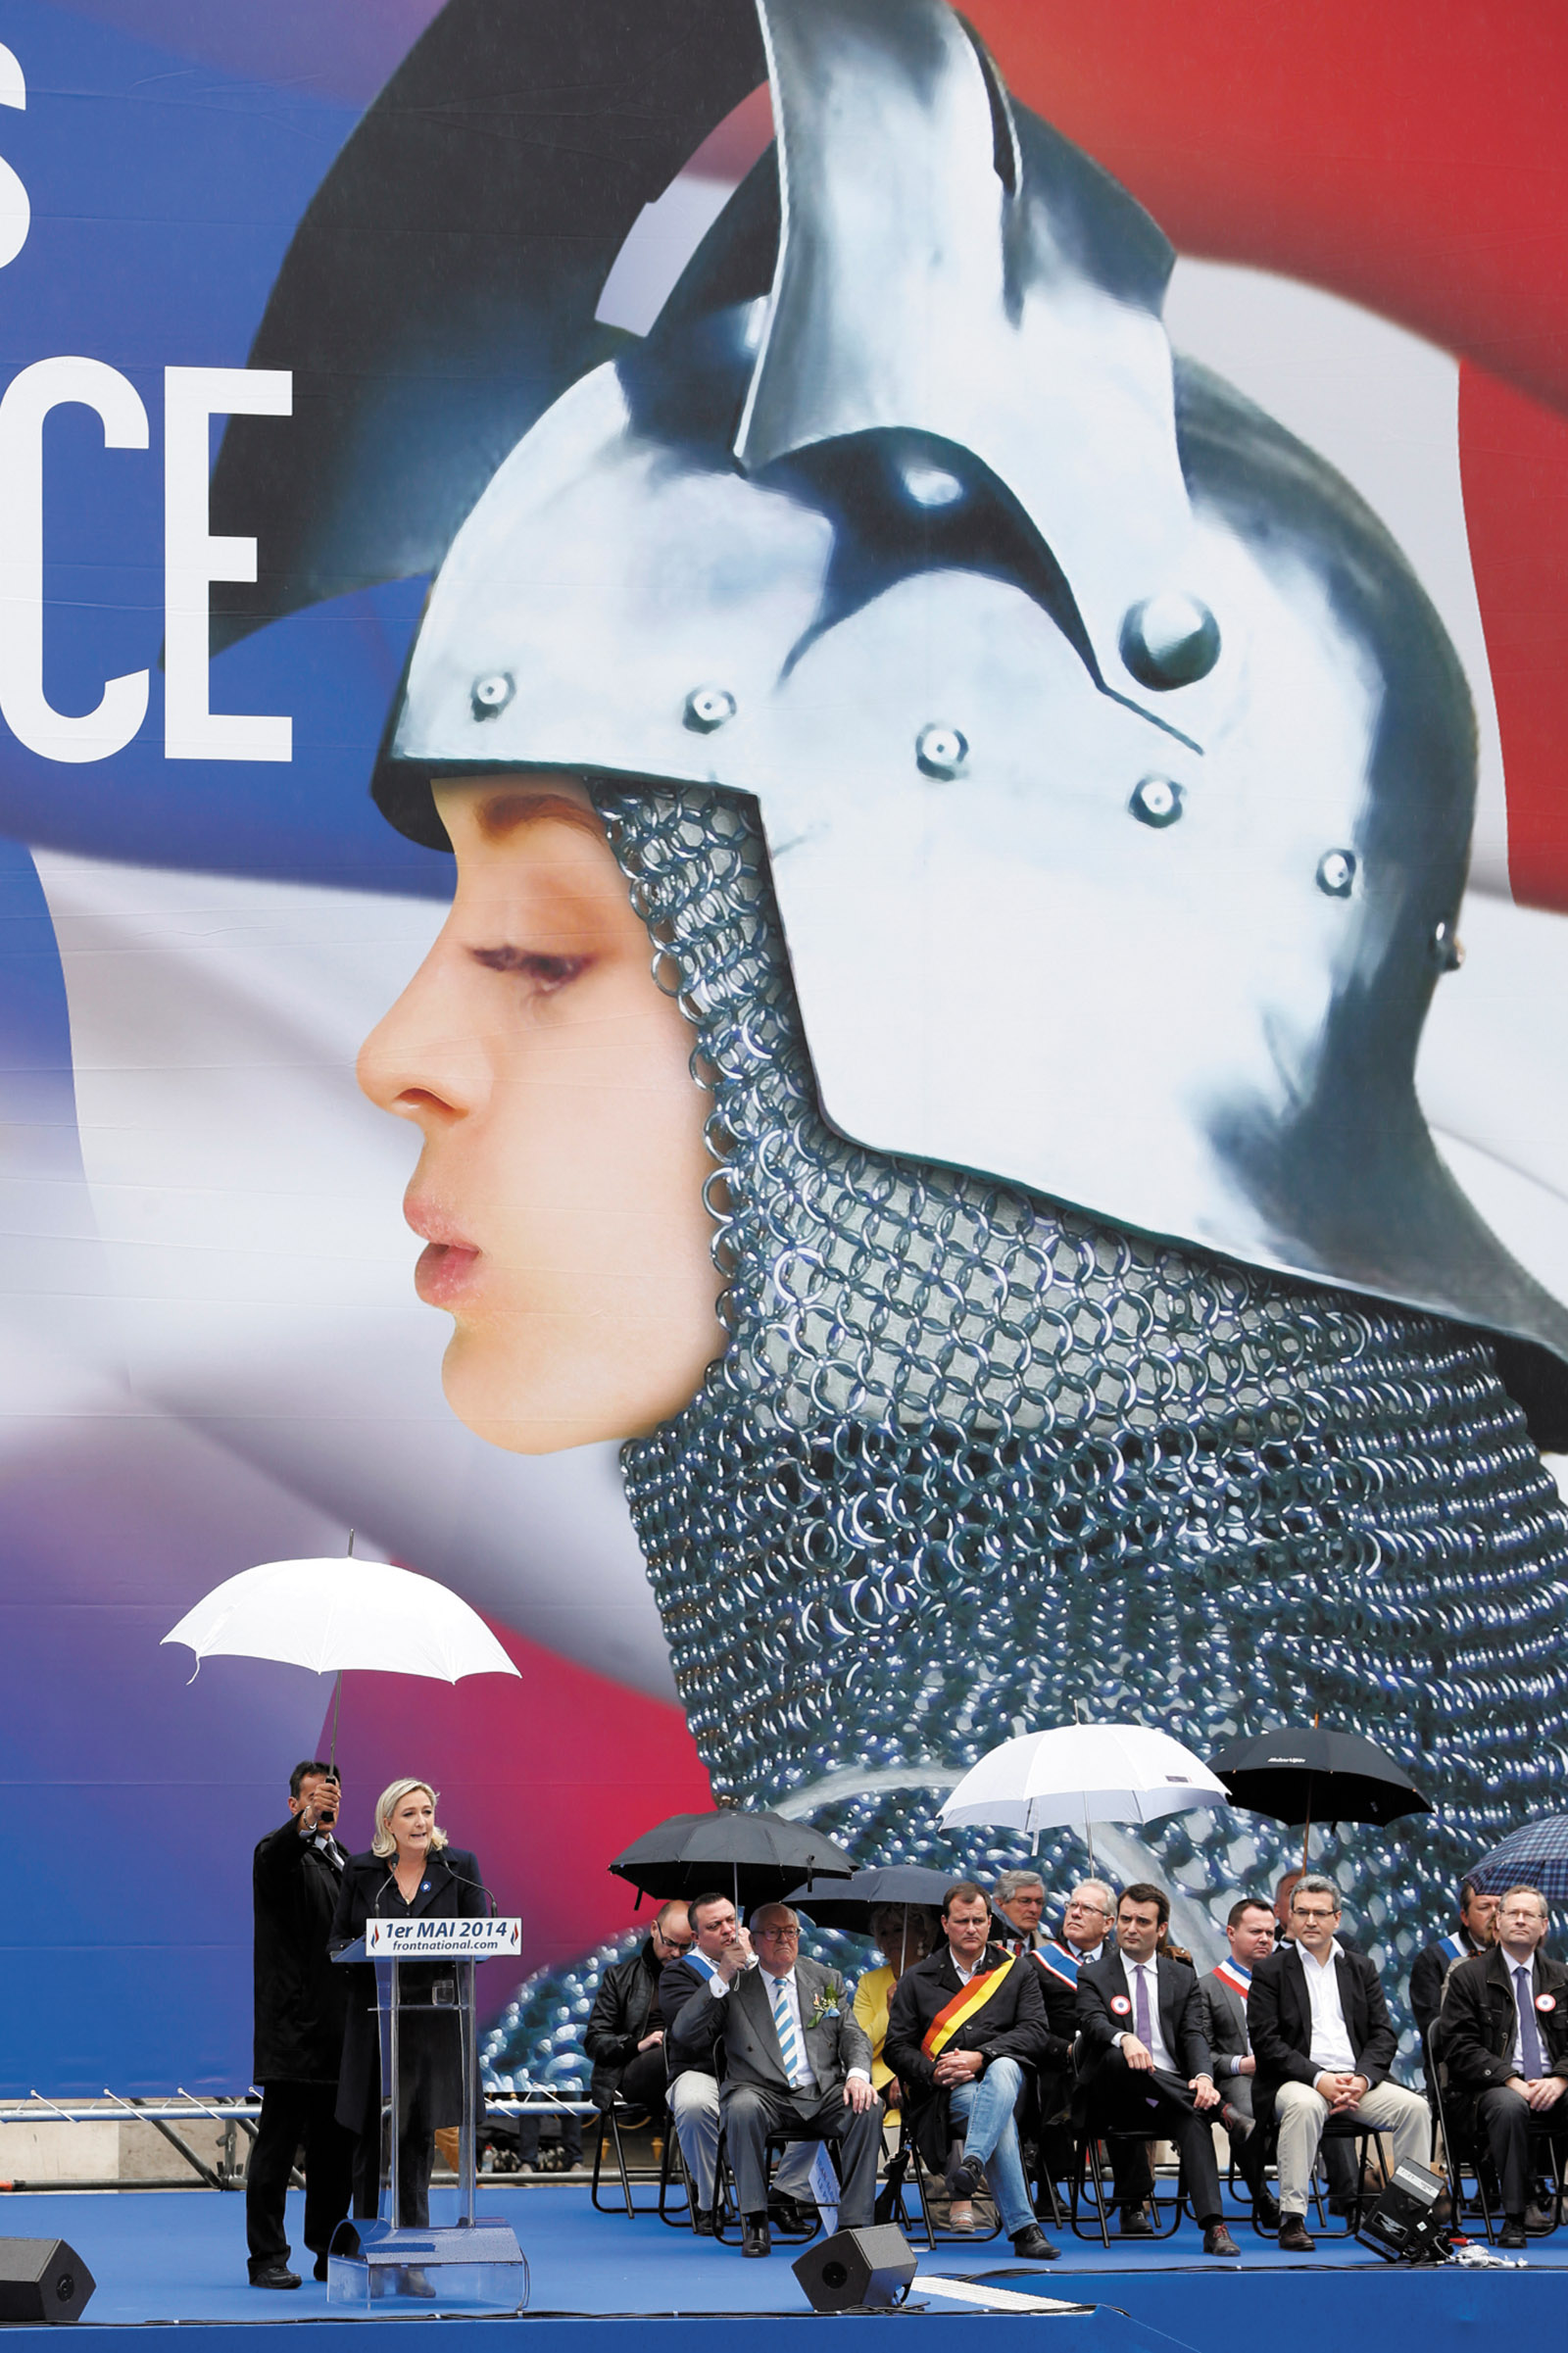 Marine Le Pen delivering a speech in front of a poster of Joan of Arc during the National Front’s May Day rally, Paris, May 2014